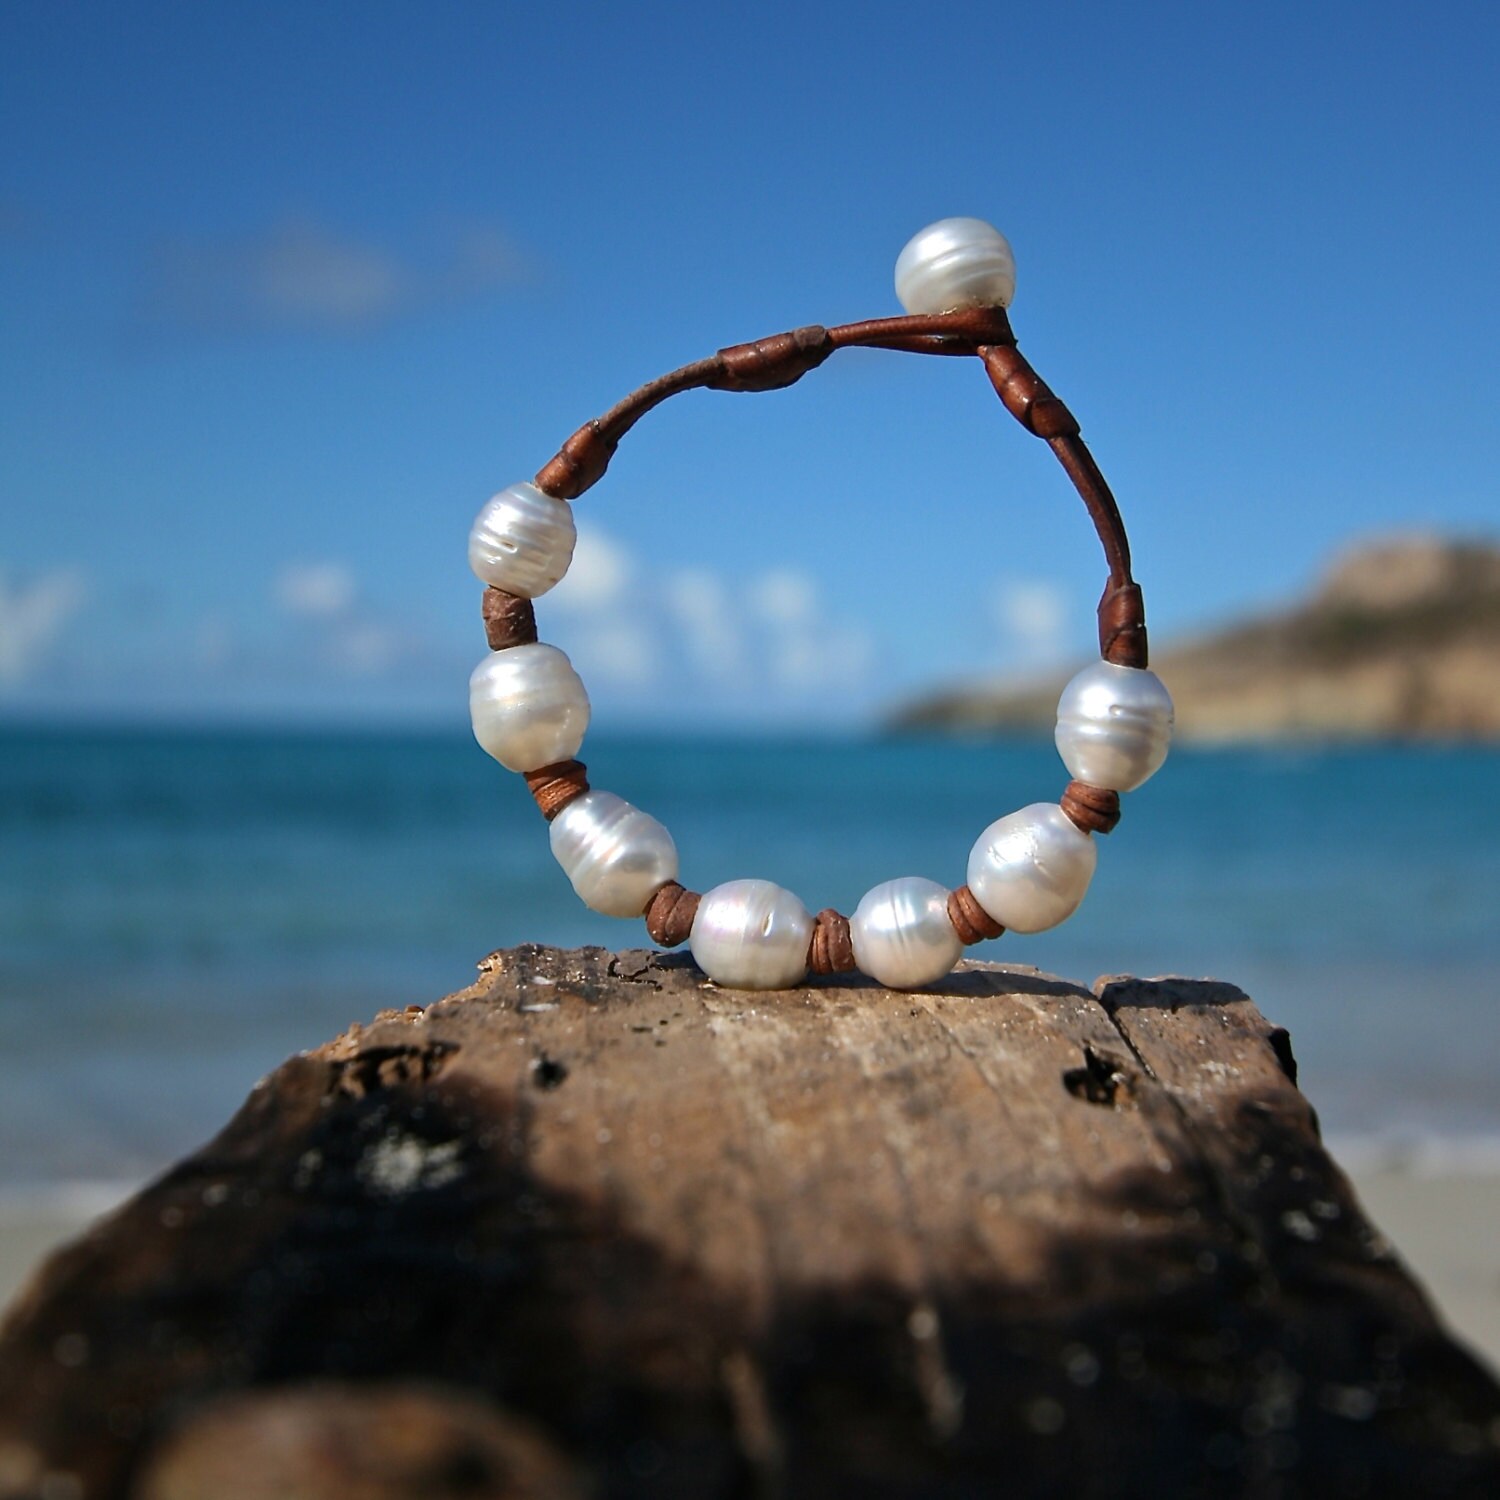 leather and pearls from st barth